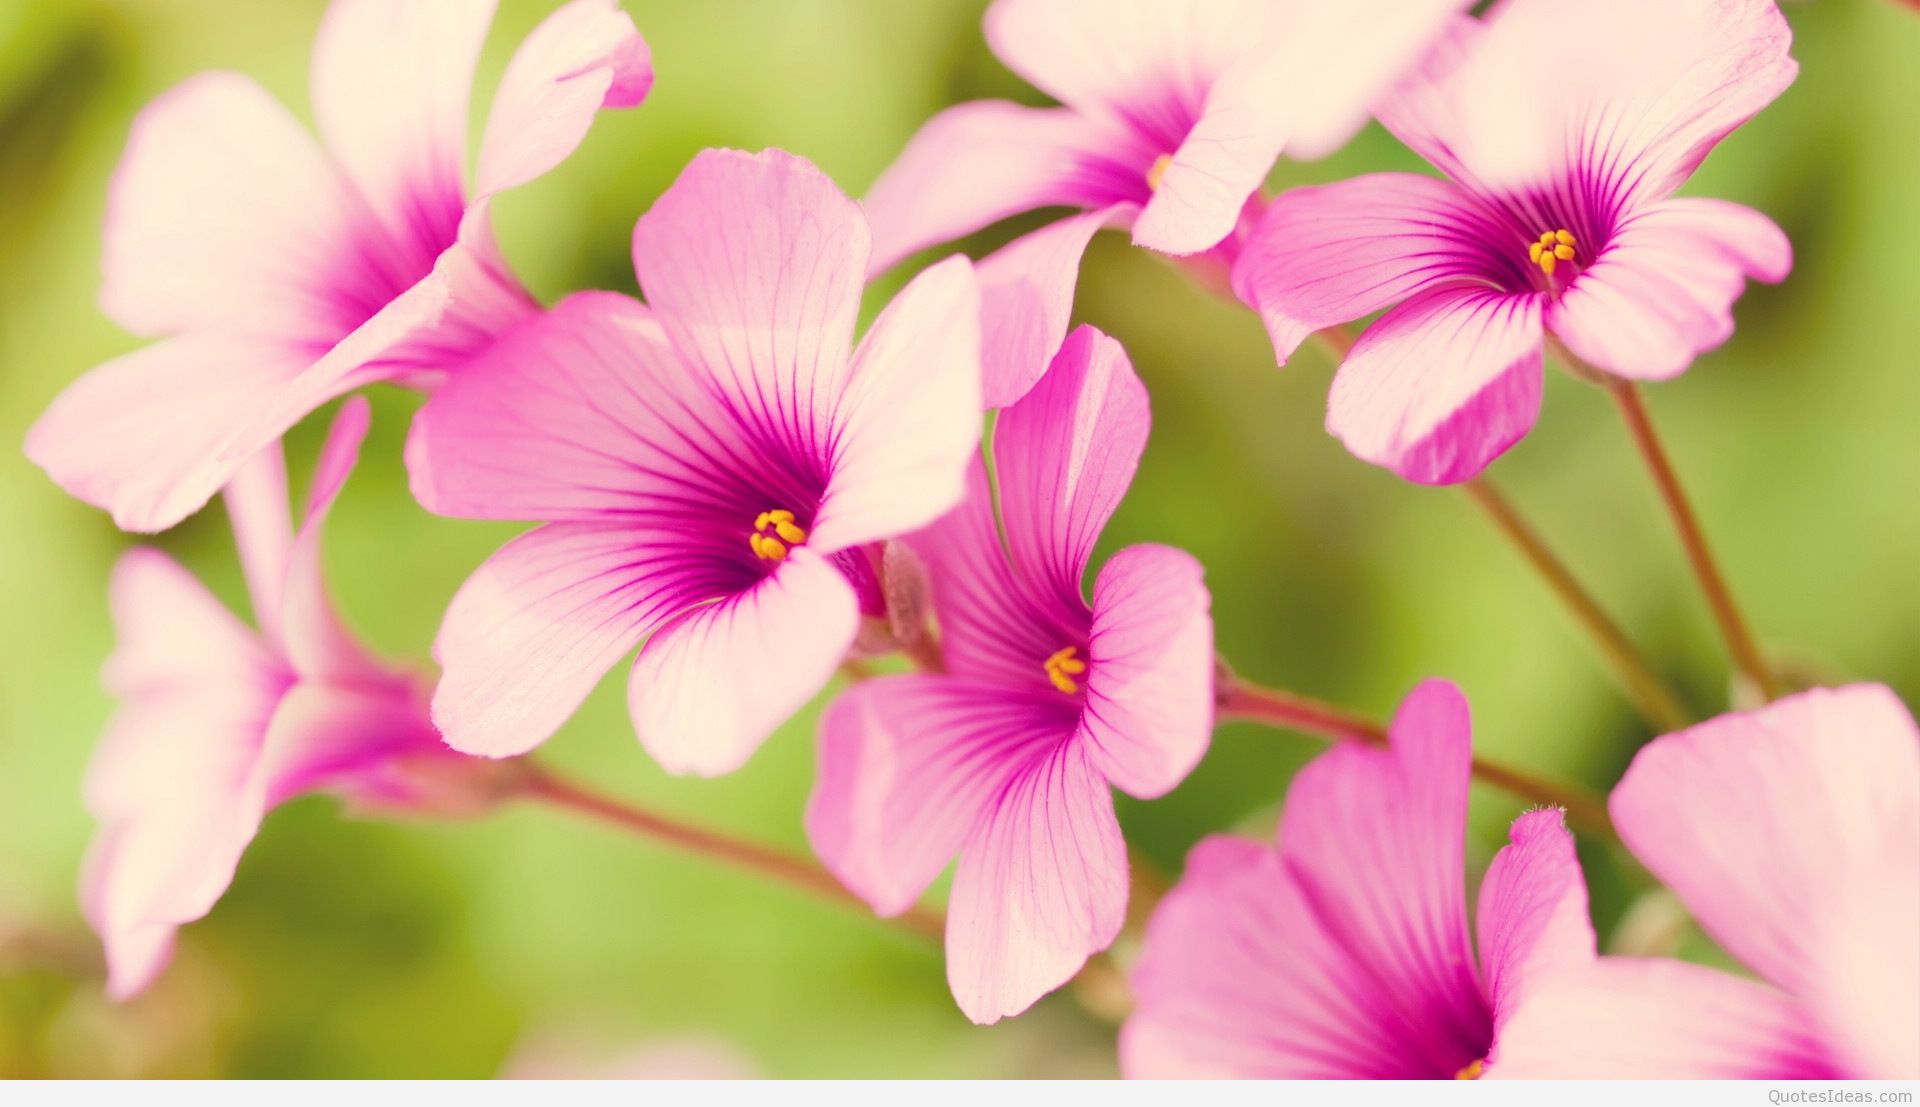 Awesome Wallpapers Of Flowers - HD Wallpaper 